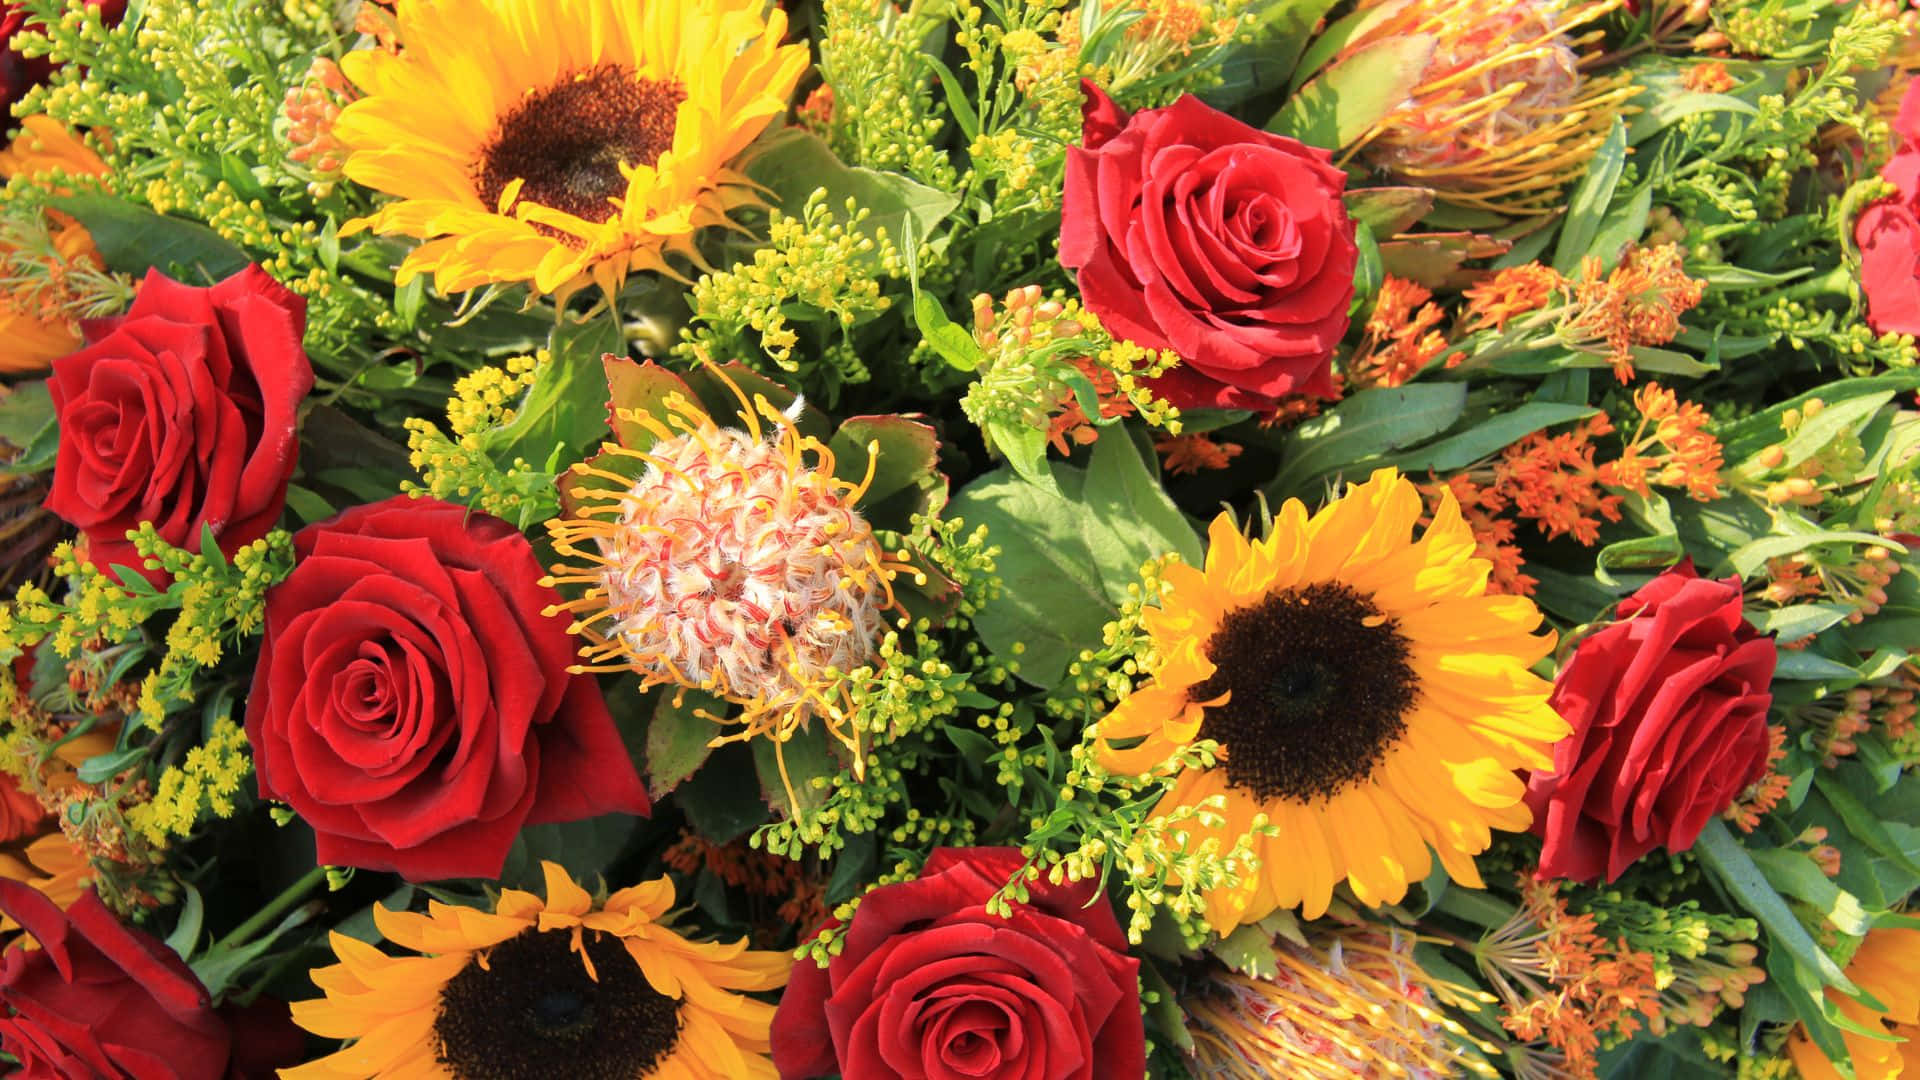 Sunflowers And Roses Large Bouquet Wallpaper